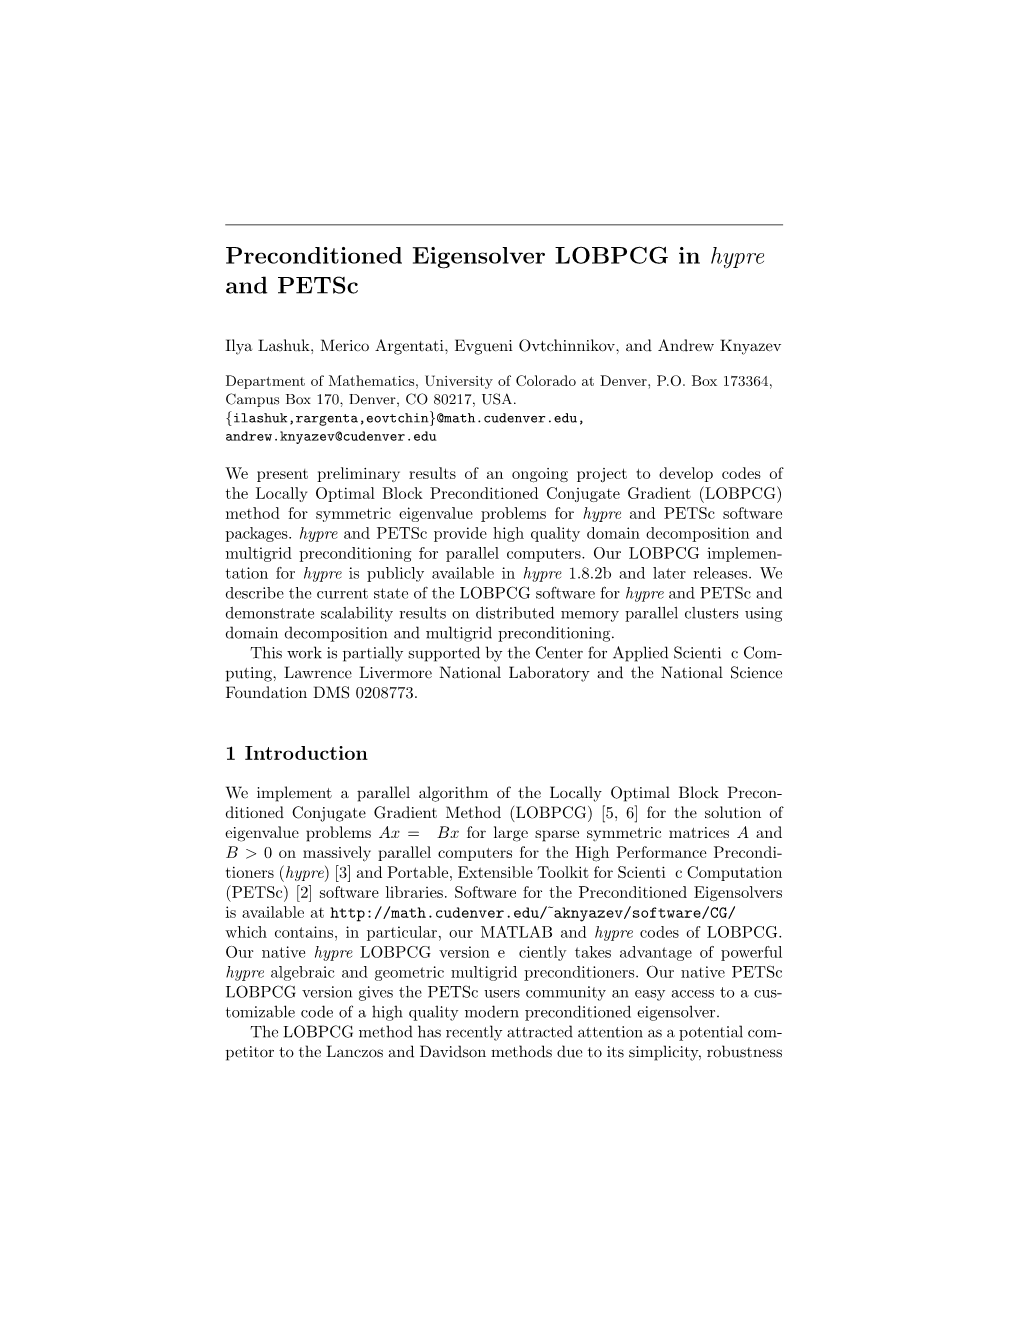 Preconditioned Eigensolver LOBPCG in Hypre and Petsc